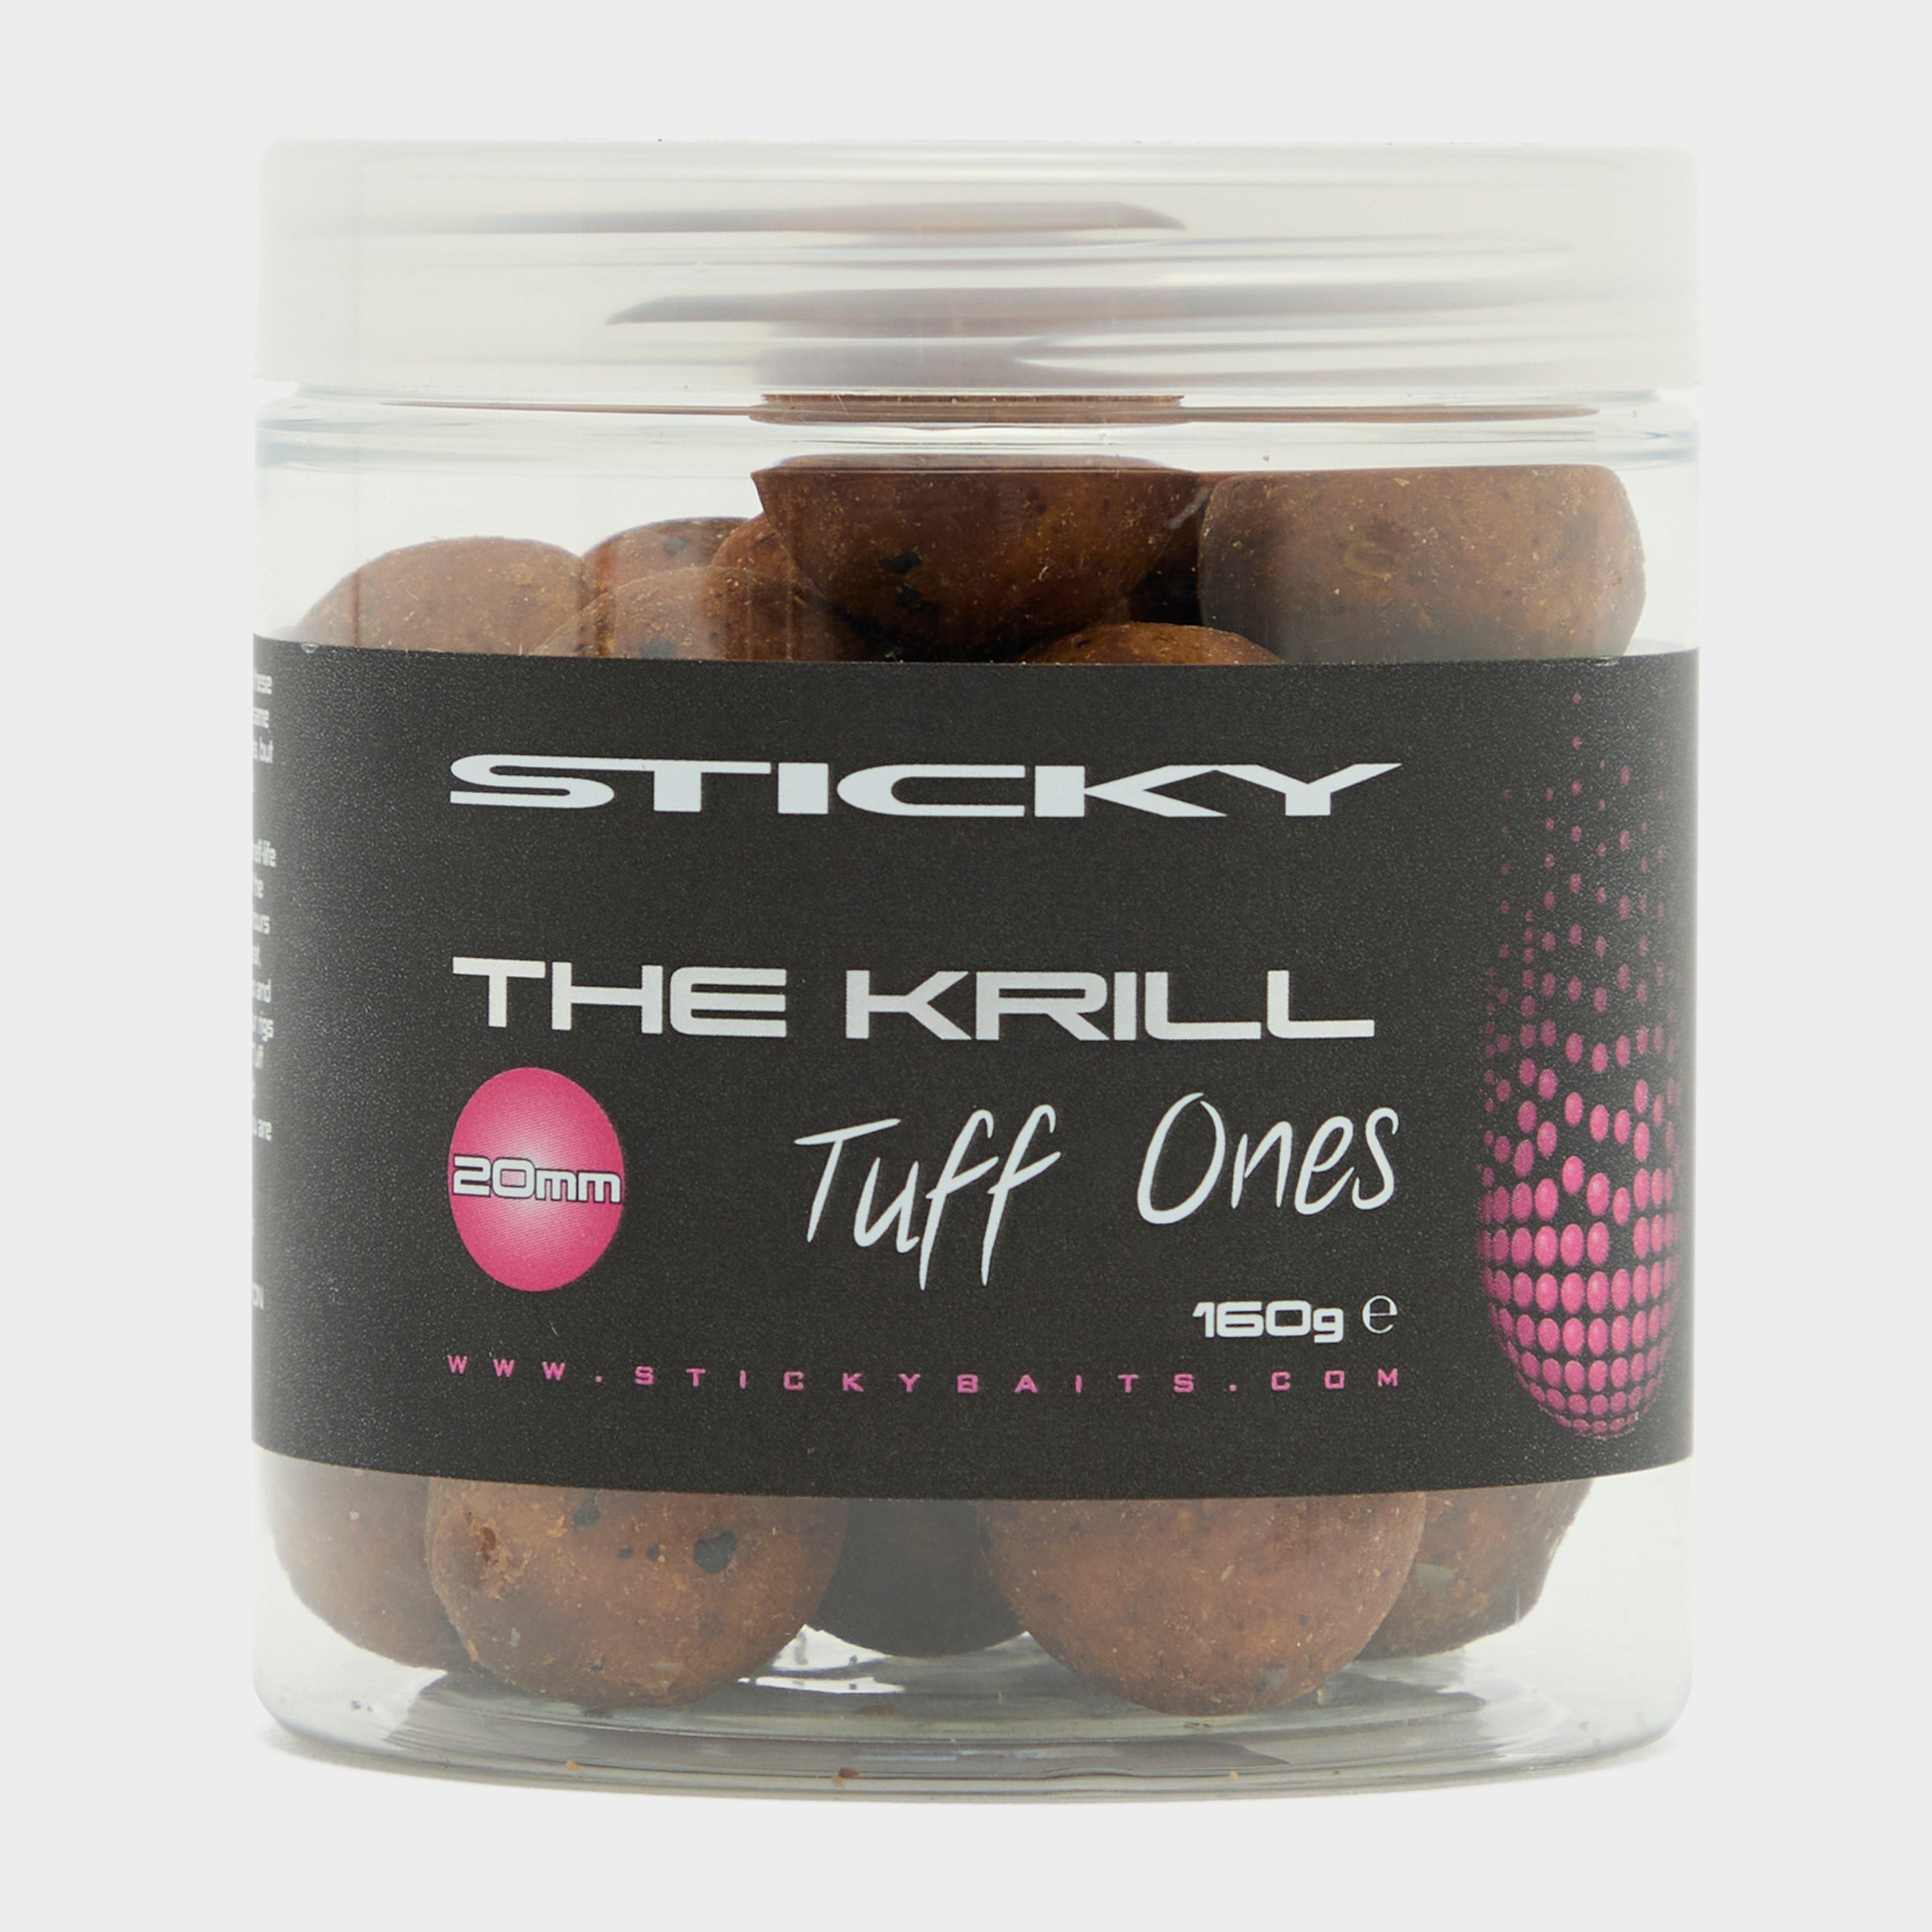 Photos - Bait Sticky Baits Sticky Krill Tuff Ones 20Mm, Brown 